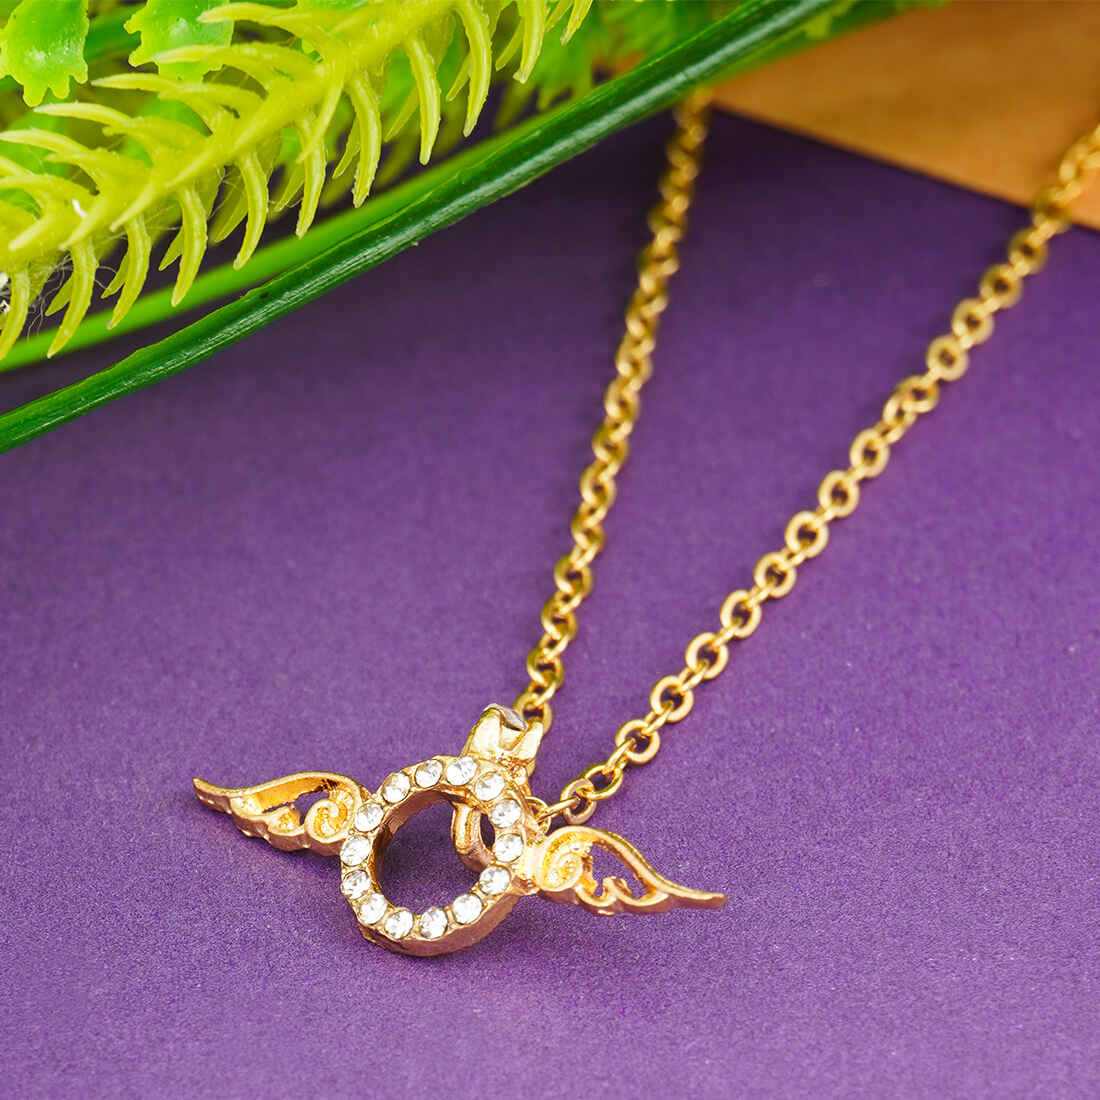 Winged Halo Necklace